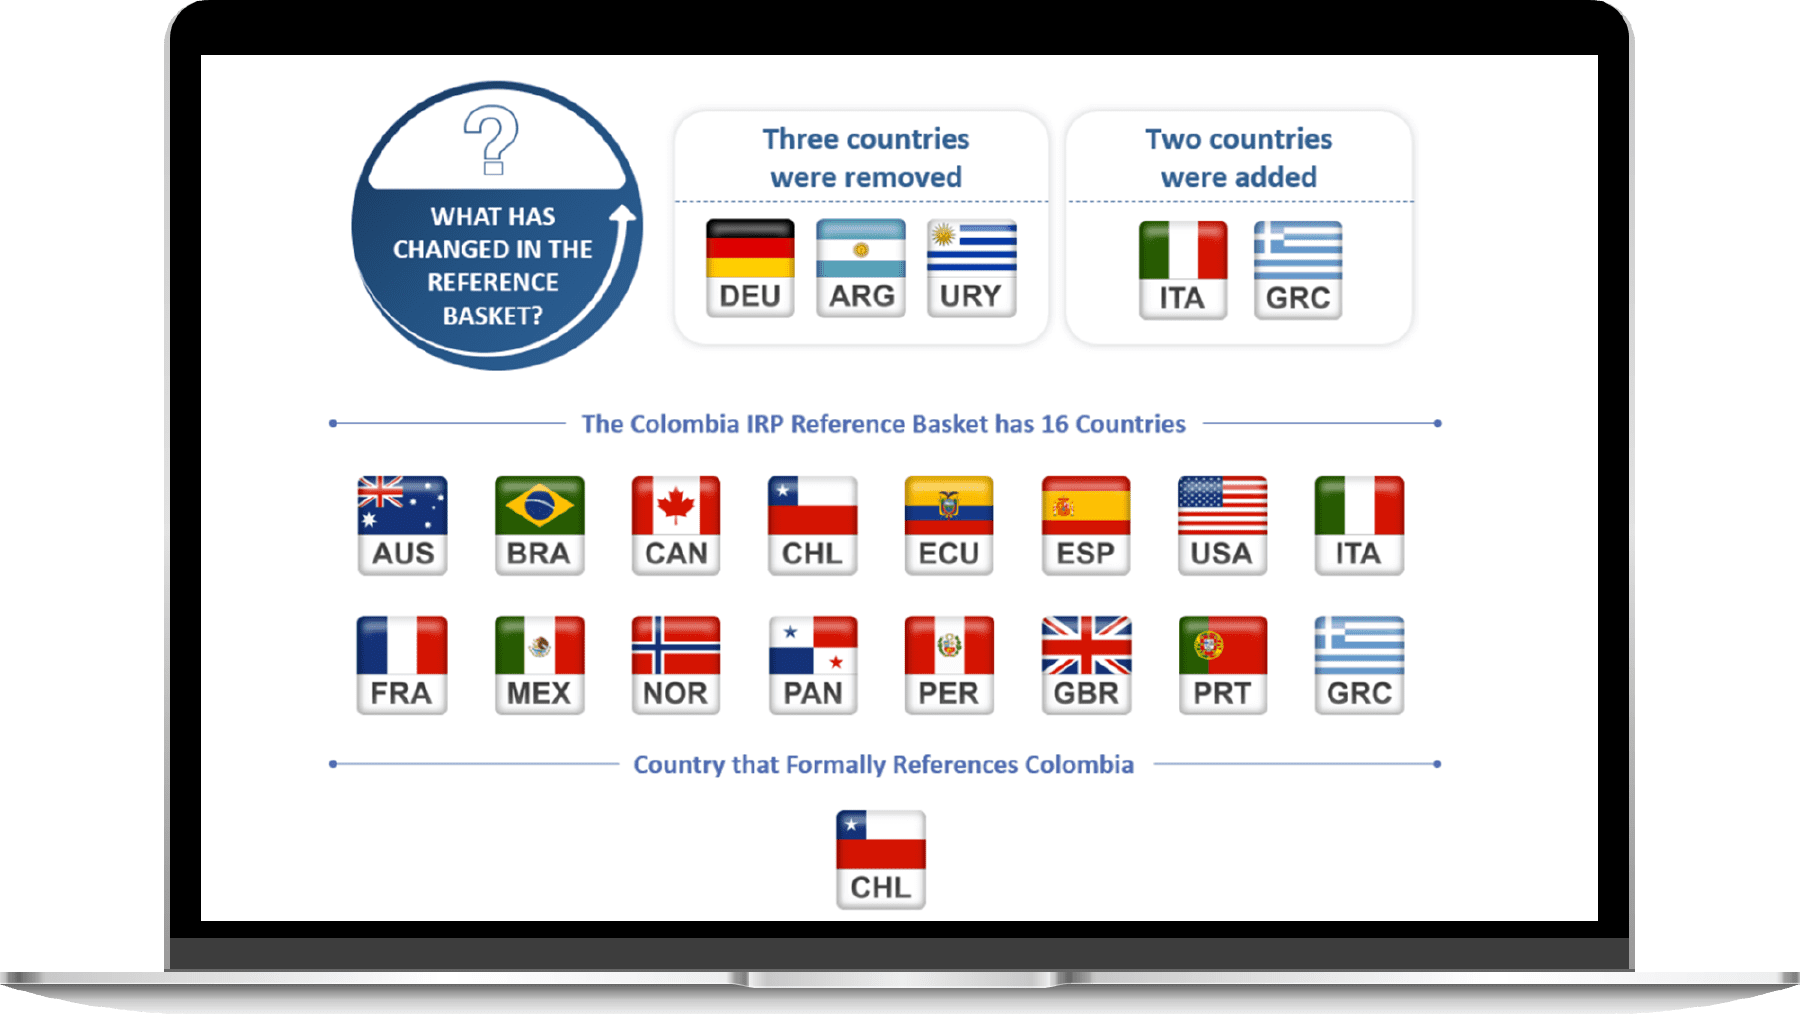 What has changed in the reference basket? Three countries were removed (DEU, ARG & URY) and two countries were added (ITA & GRC)